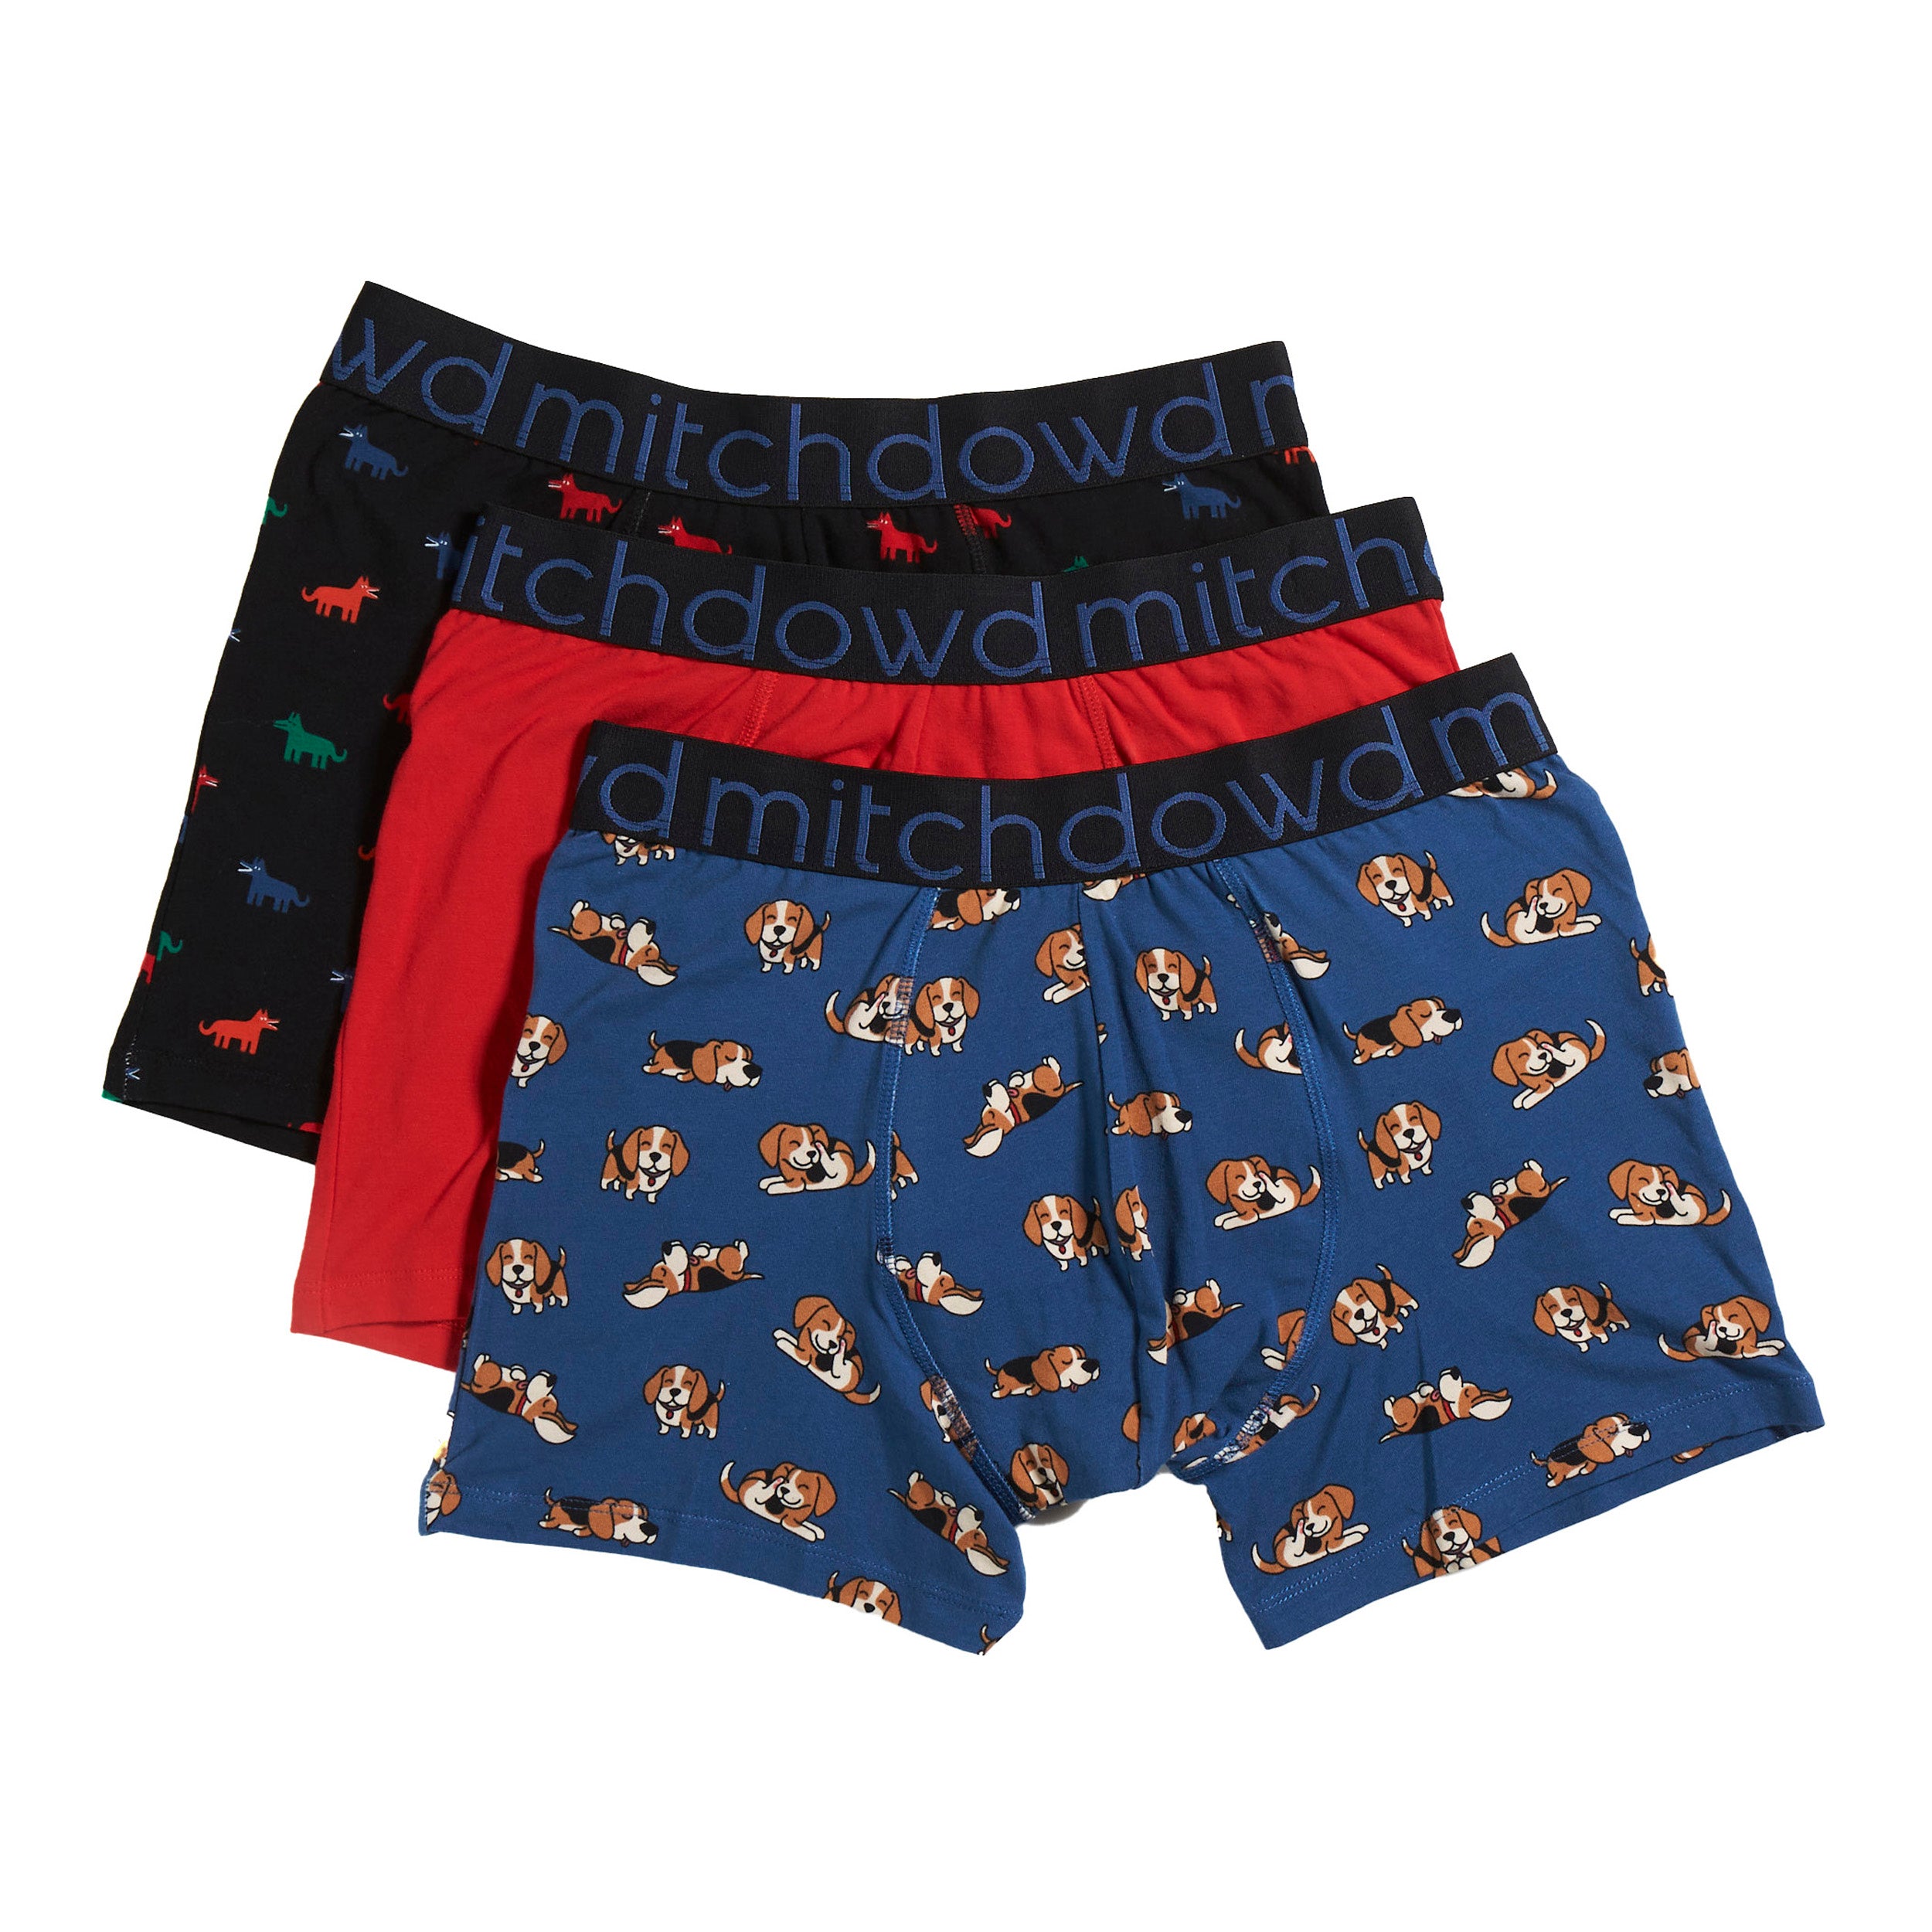 Men's Lazy Beagles Printed Cotton Room To Move Trunks 3 Pack  AT VI AR et TS NG - C bj"% 0 Y N T3 